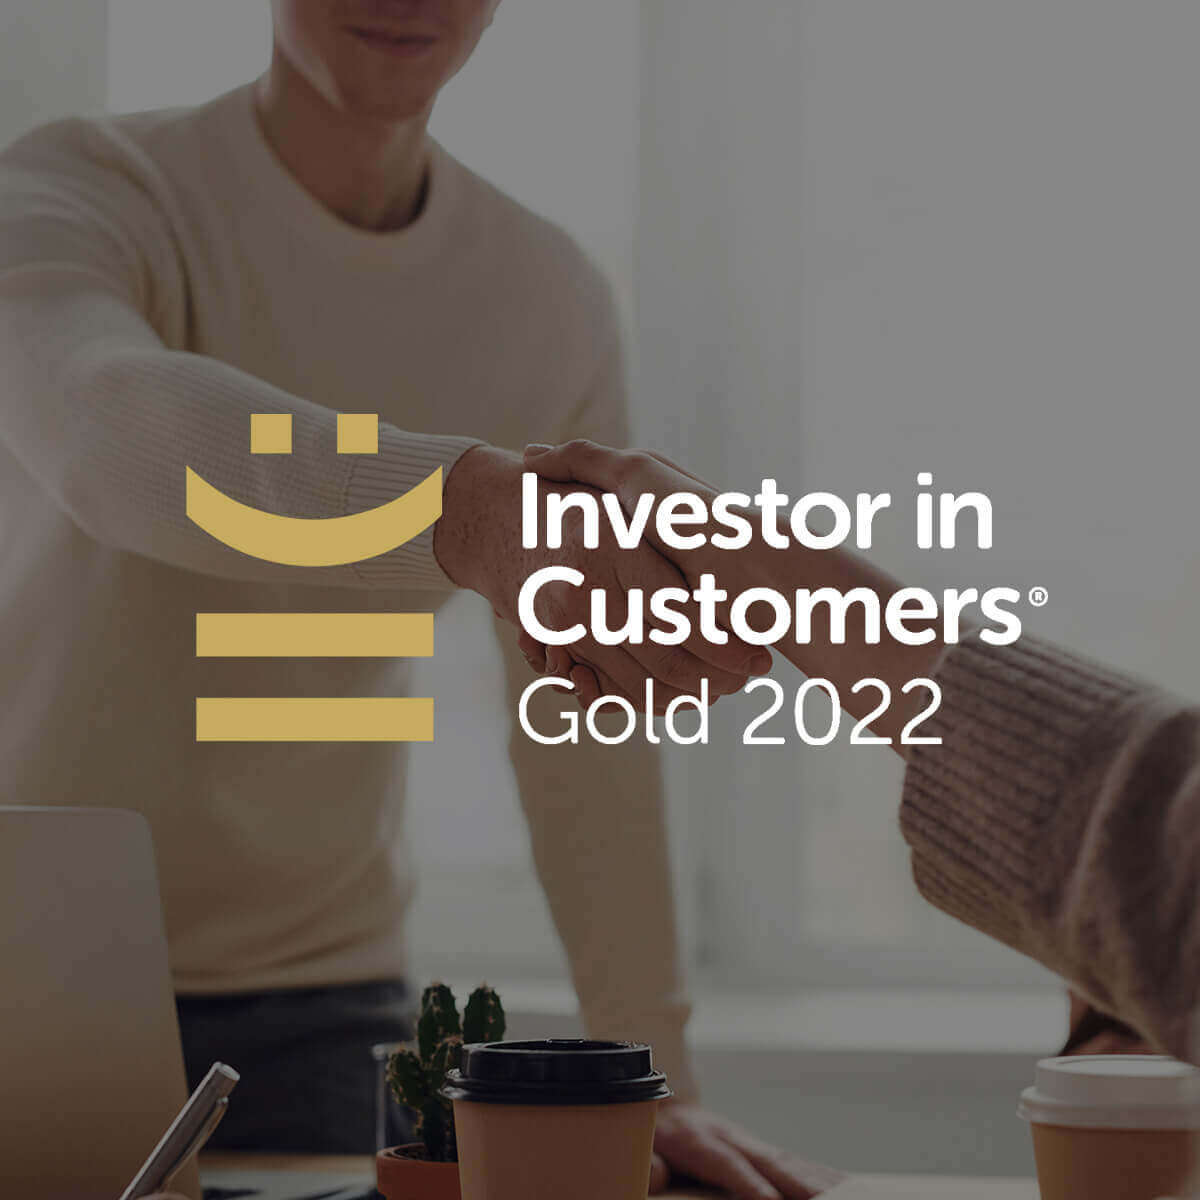 Investor in Customers Gold 2022